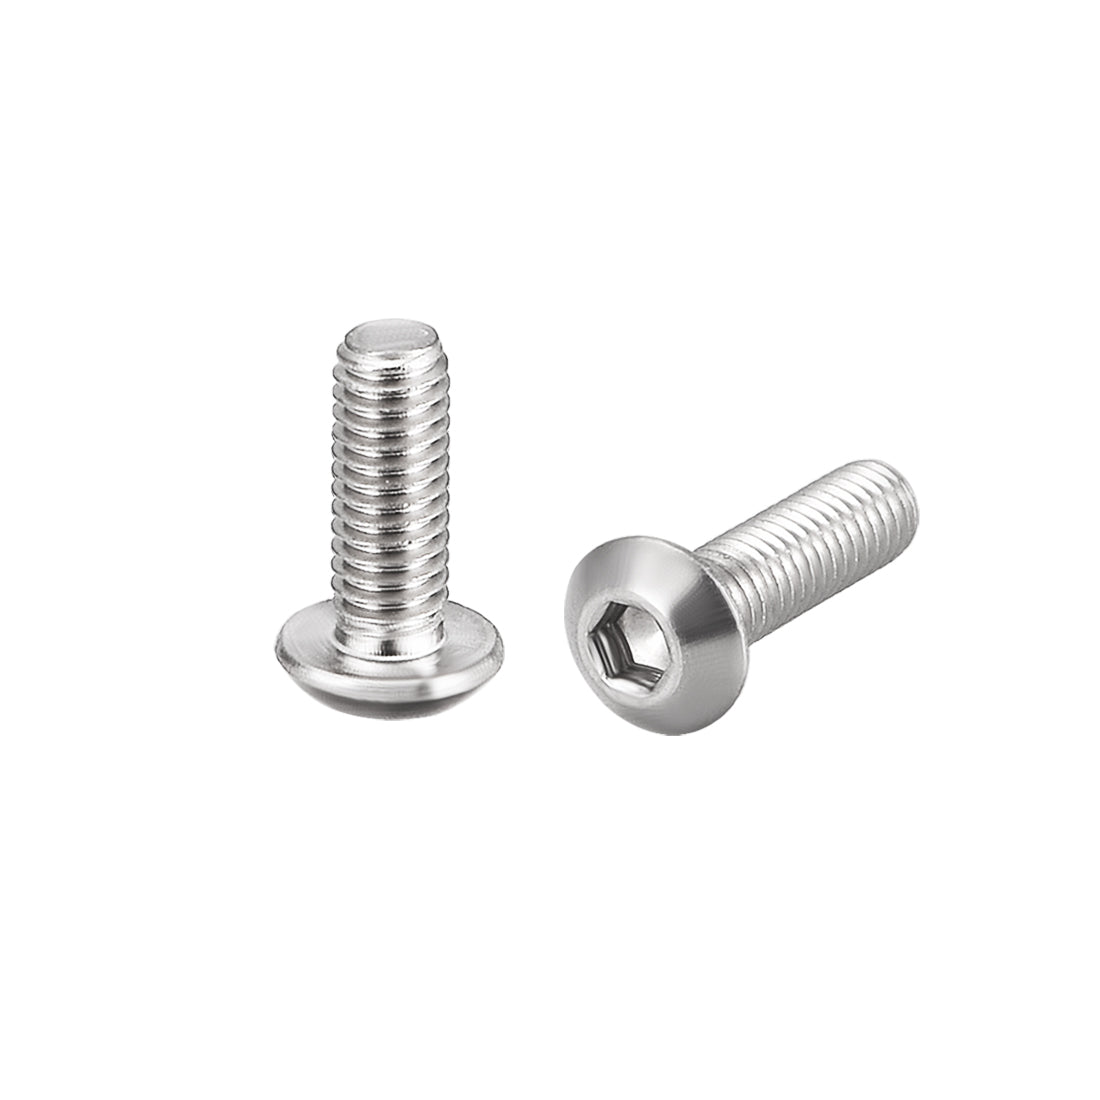 uxcell Uxcell M3x8mm Machine Screws Hex Socket Round Head Screw 304 Stainless Steel Fasteners Bolts 20pcs